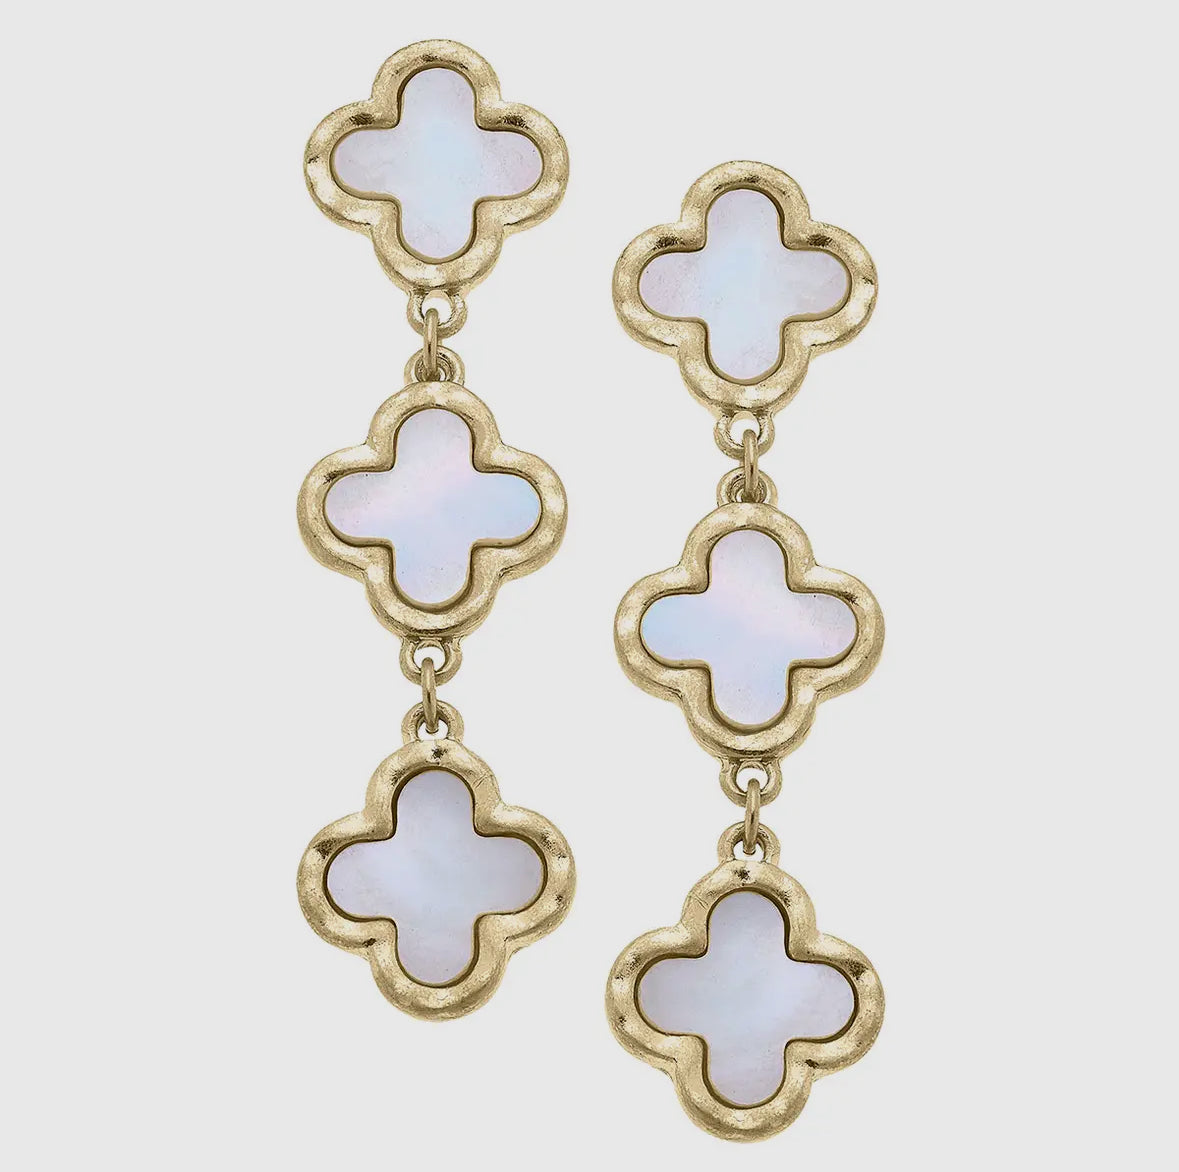 Bethany Clover Mother of Pearl Earrings